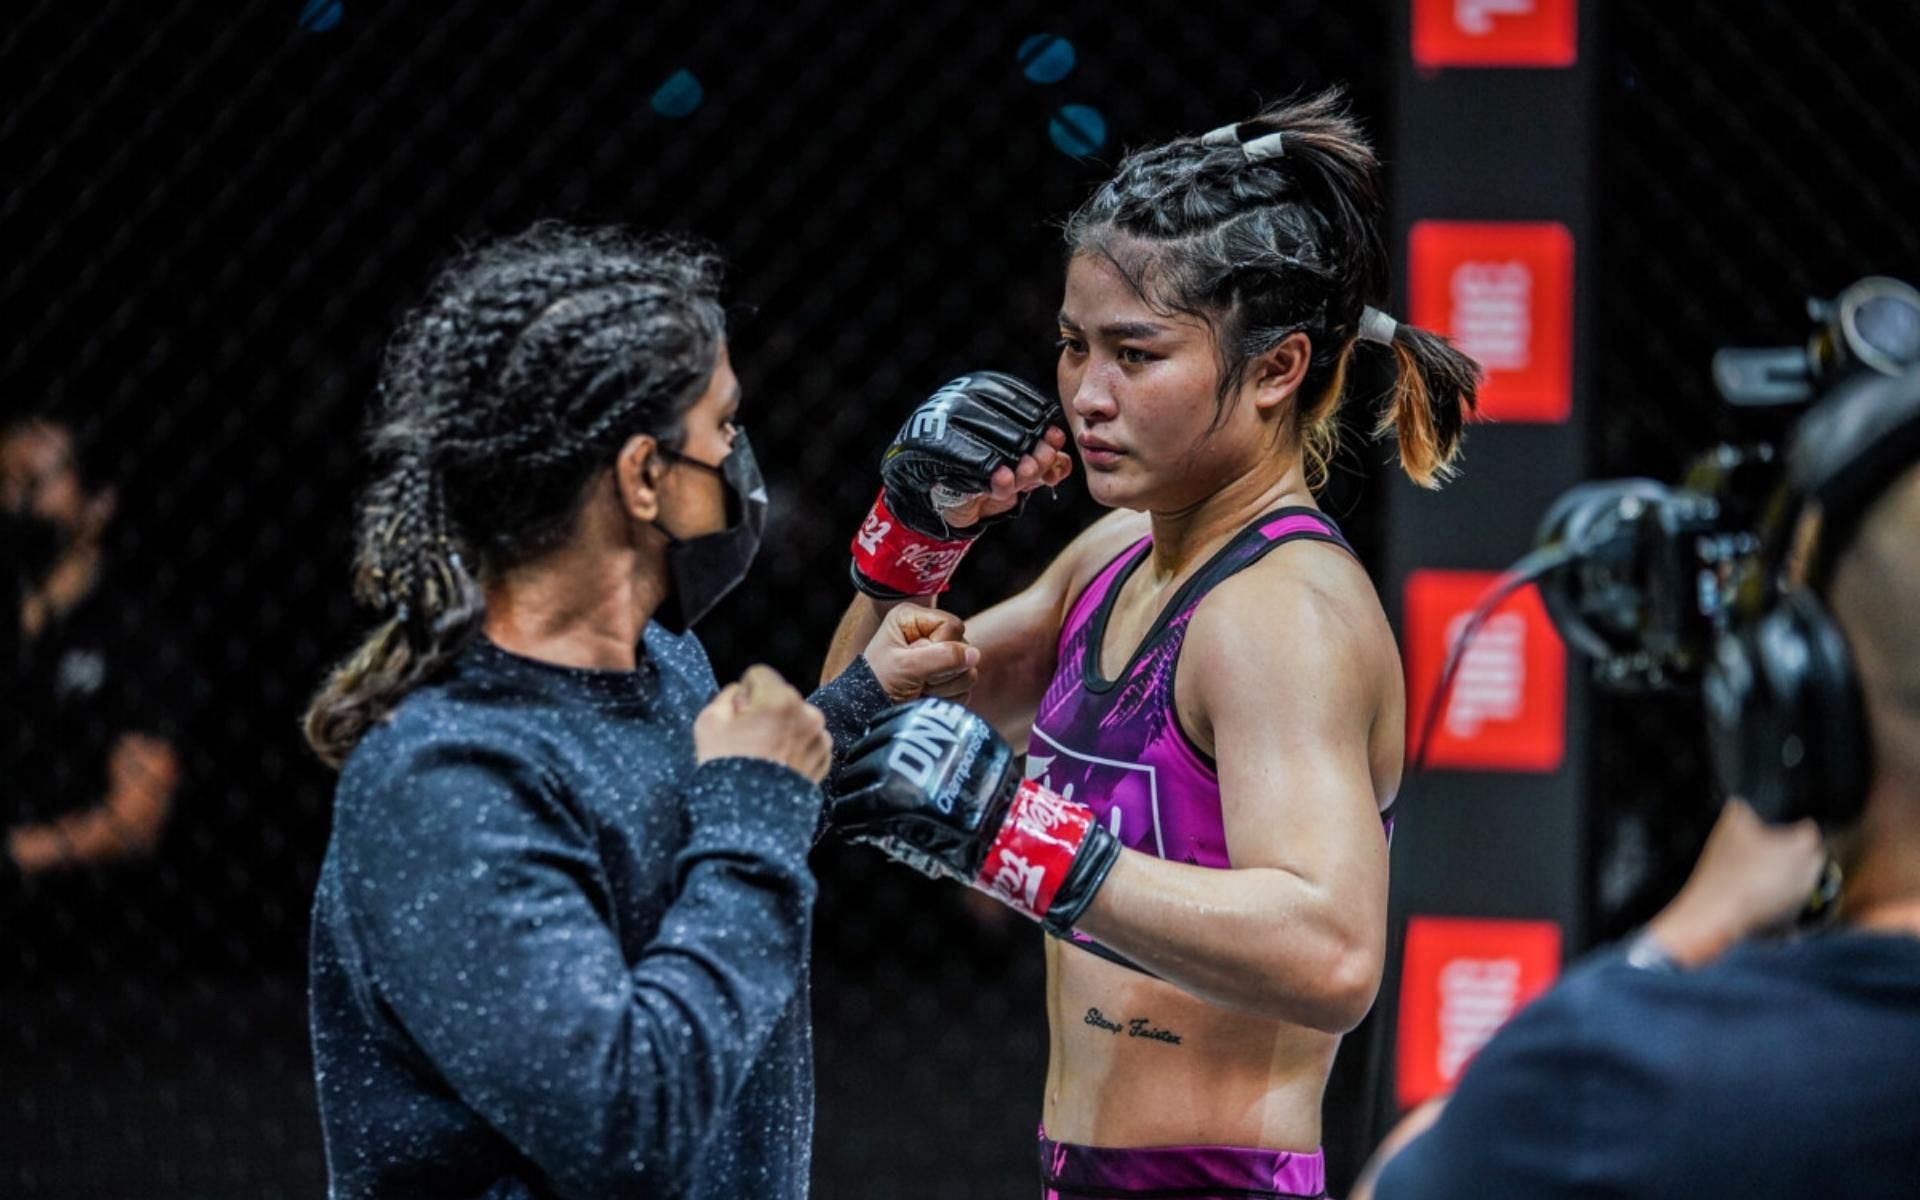 And then there were two. Ritu Phogat (left) and Stamp Fairtex (right) will face each other in the co-main event of ONE: Winter Warriors to determine the ONE atomweight Grand Prix tournament champion. (Image courtesy of ONE Championship)